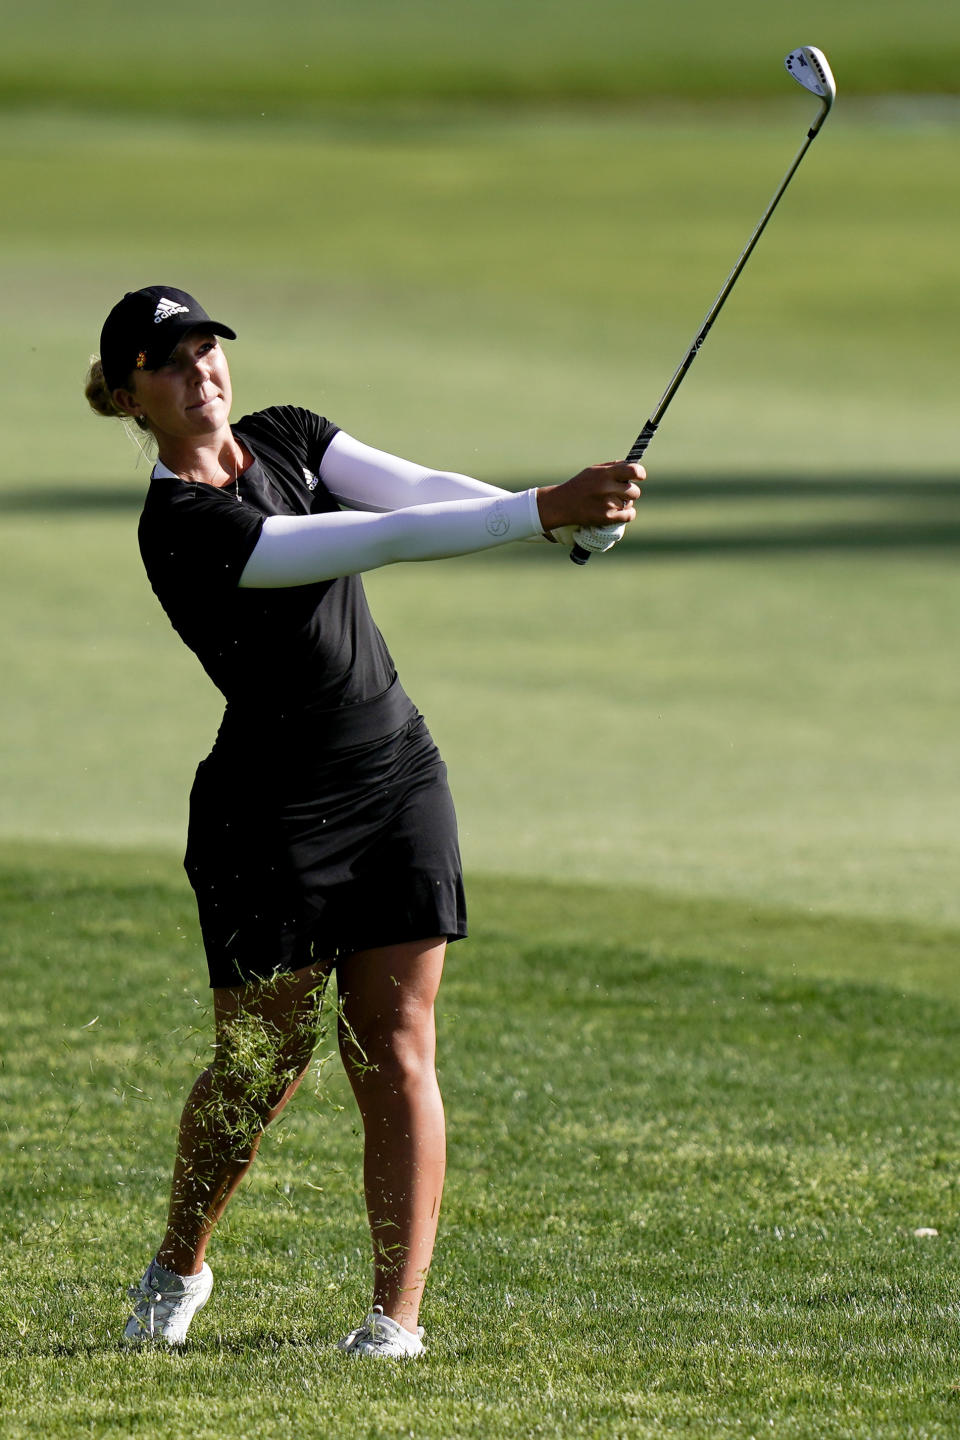 Linnea Strom, of Sweden, hits from the rough on the 18th hole during the first round of the LPGA Tour ANA Inspiration golf tournament at Mission Hills Country Club on Thursday, April 4, 2019, in Rancho Mirage, Calif. (AP Photo/Chris Carlson)